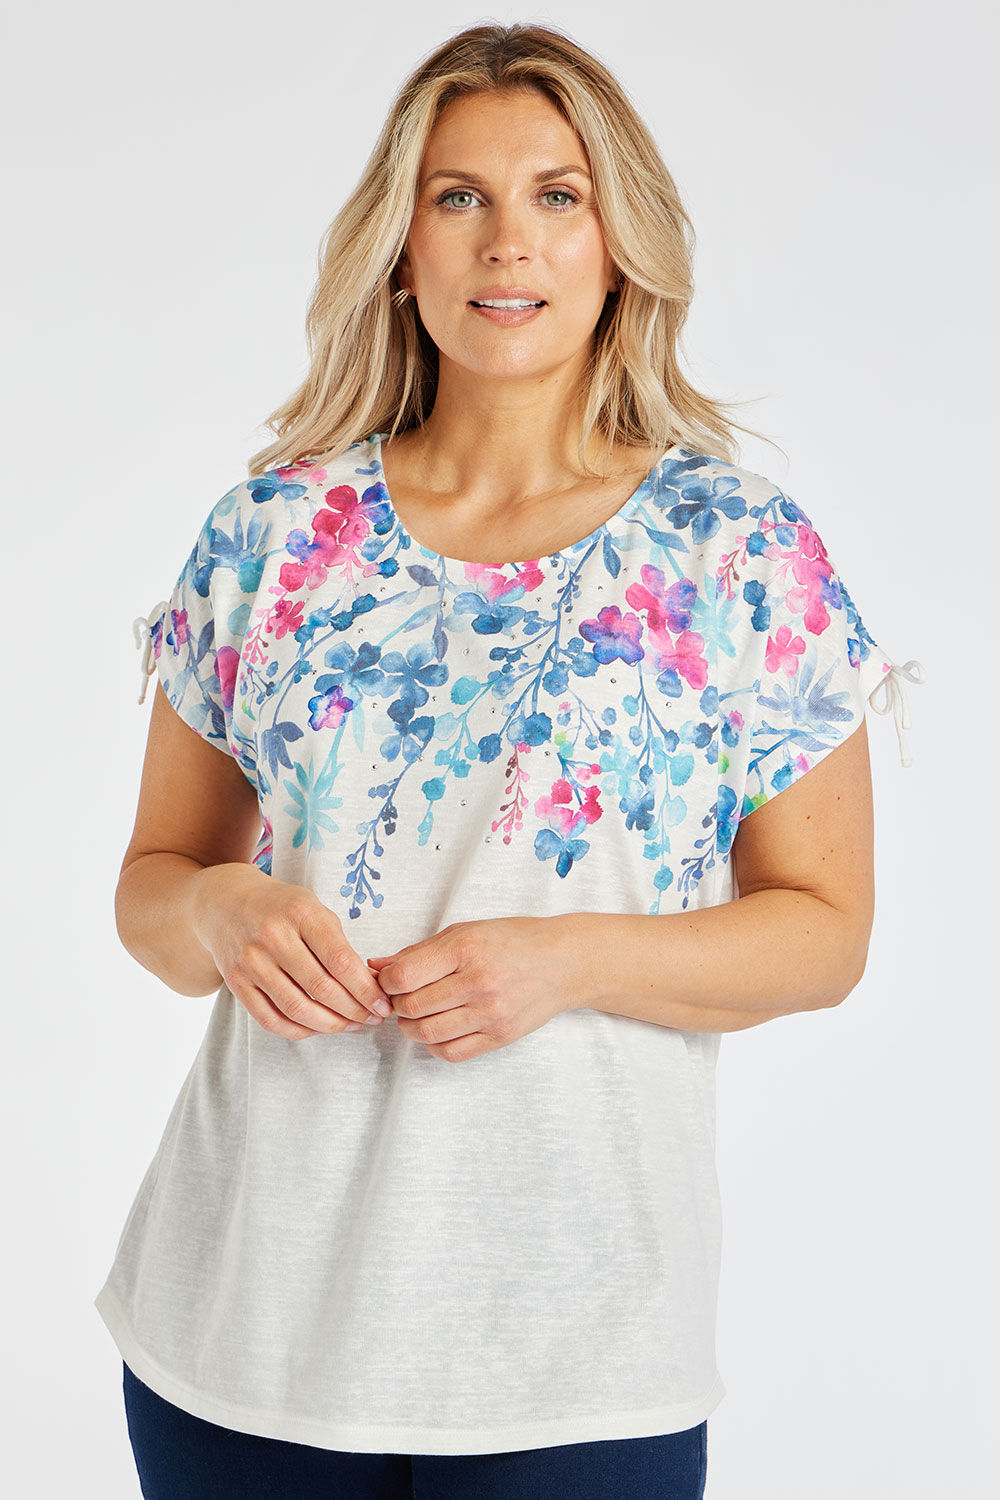 Plus Size Tops & T-Shirts for Women | Plus Size Summer Tops